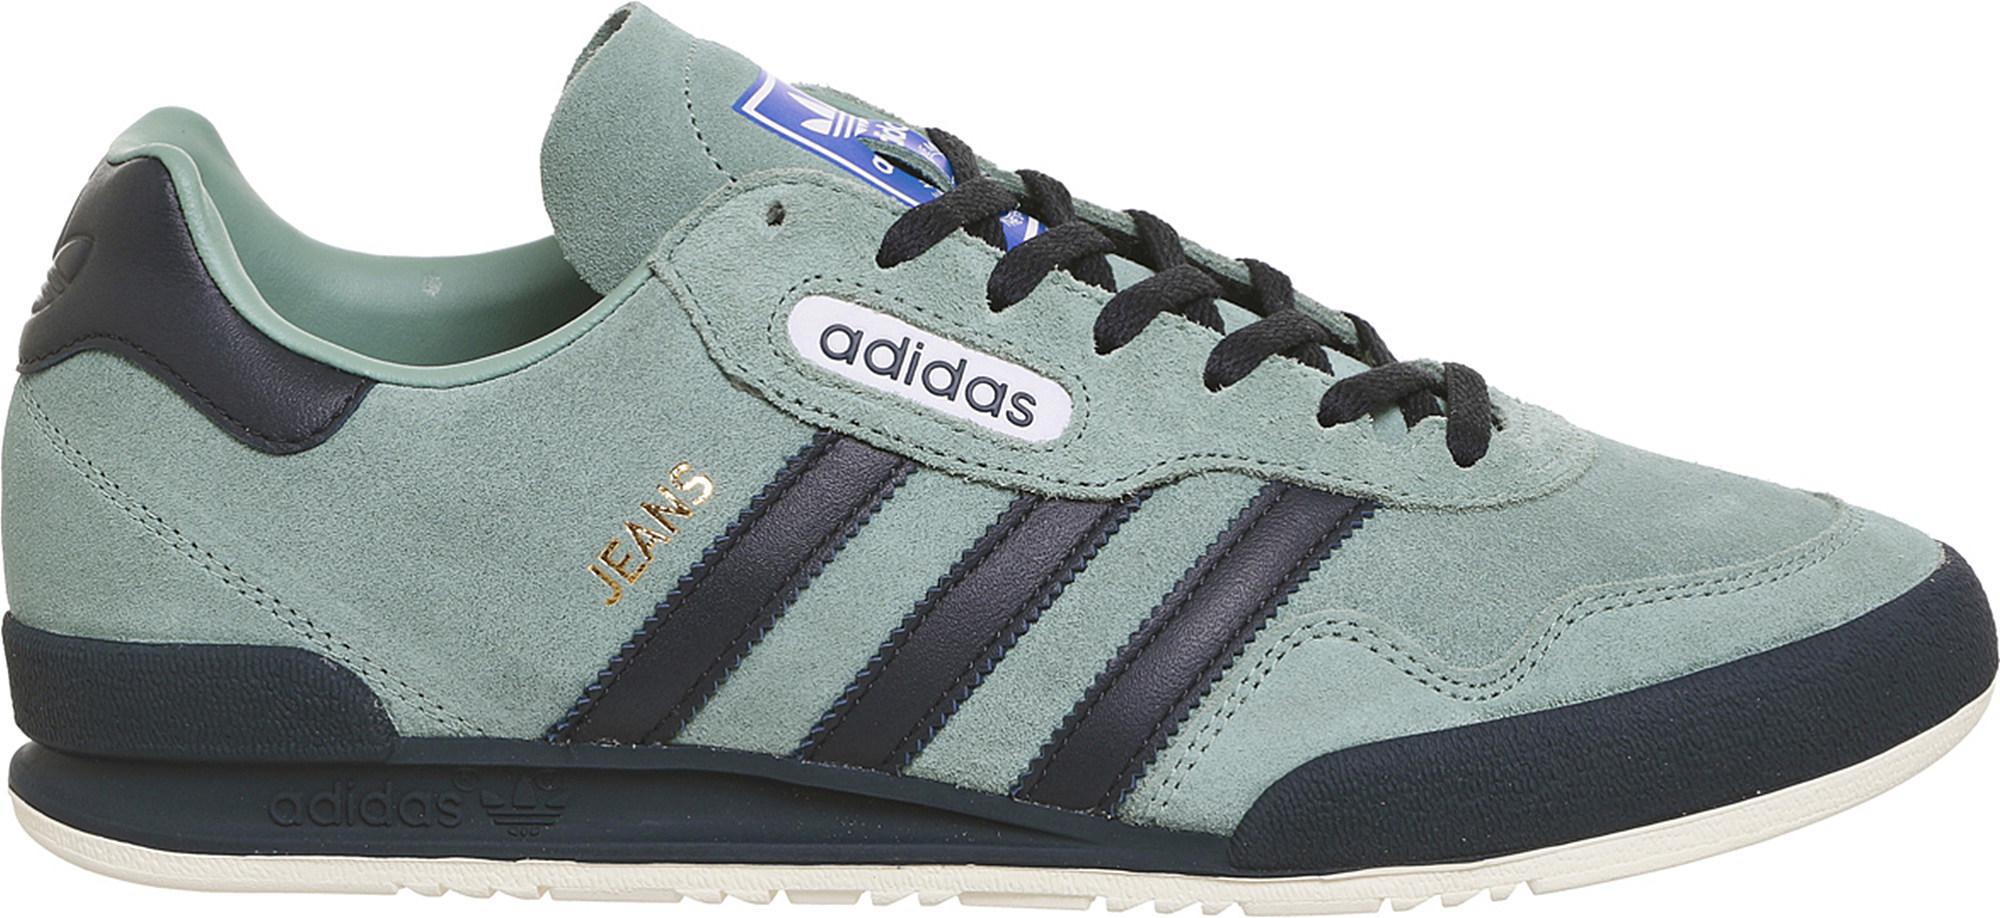 adidas Denim Jeans Super Suede Trainers in Gray for Men - Lyst